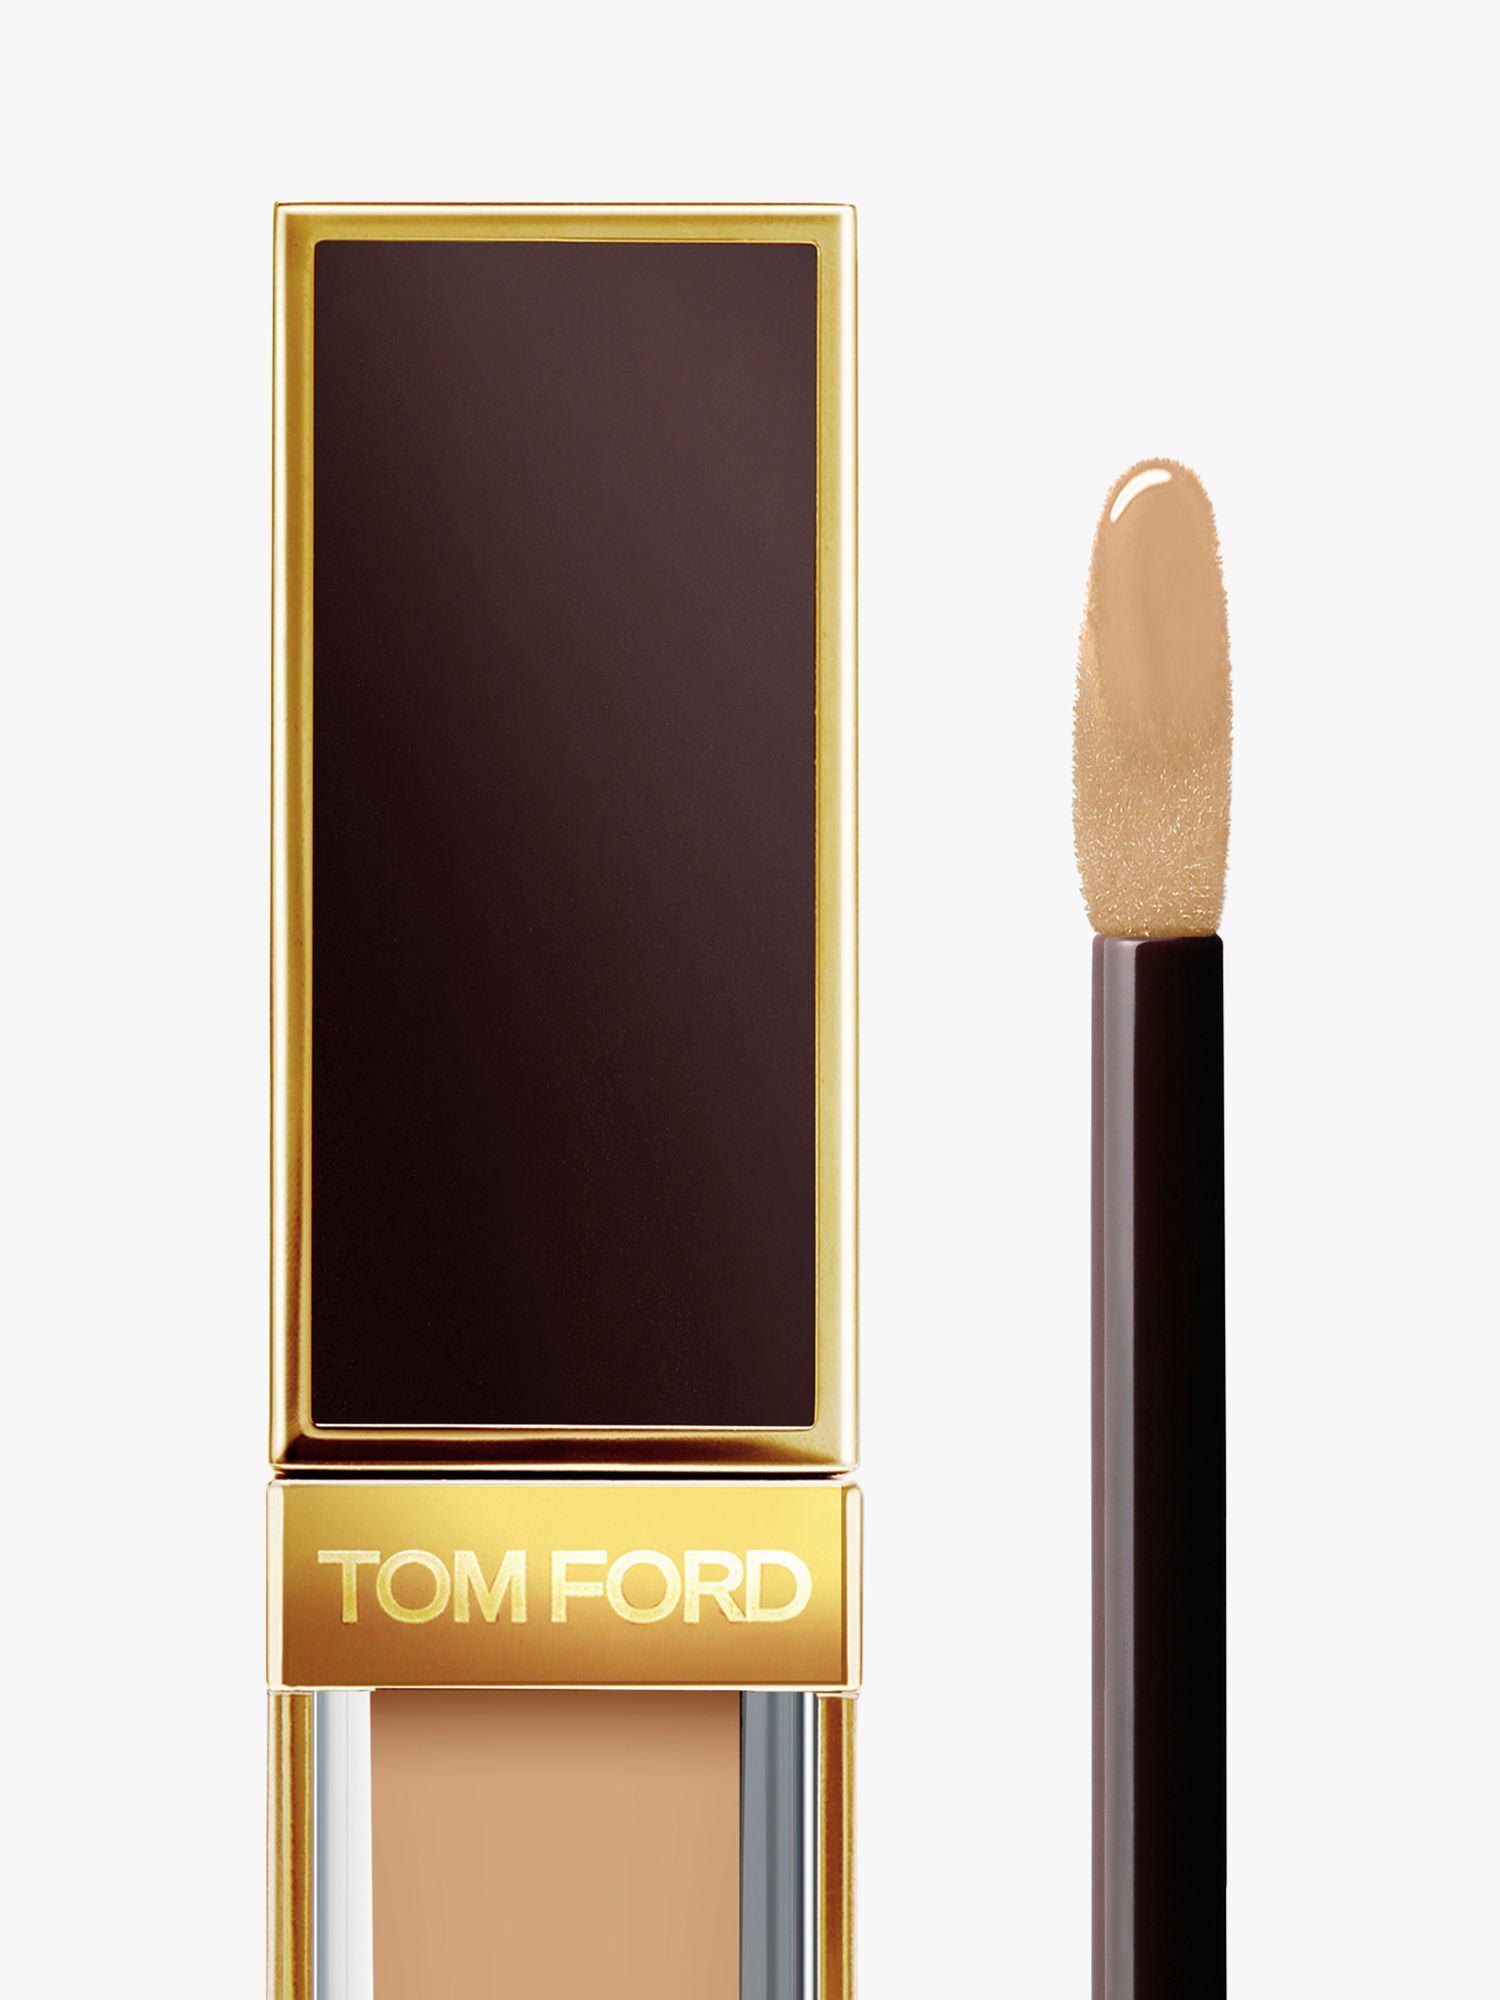 TOM FORD Shade & Illuminate Concealer, 3W1 Golden at John Lewis & Partners